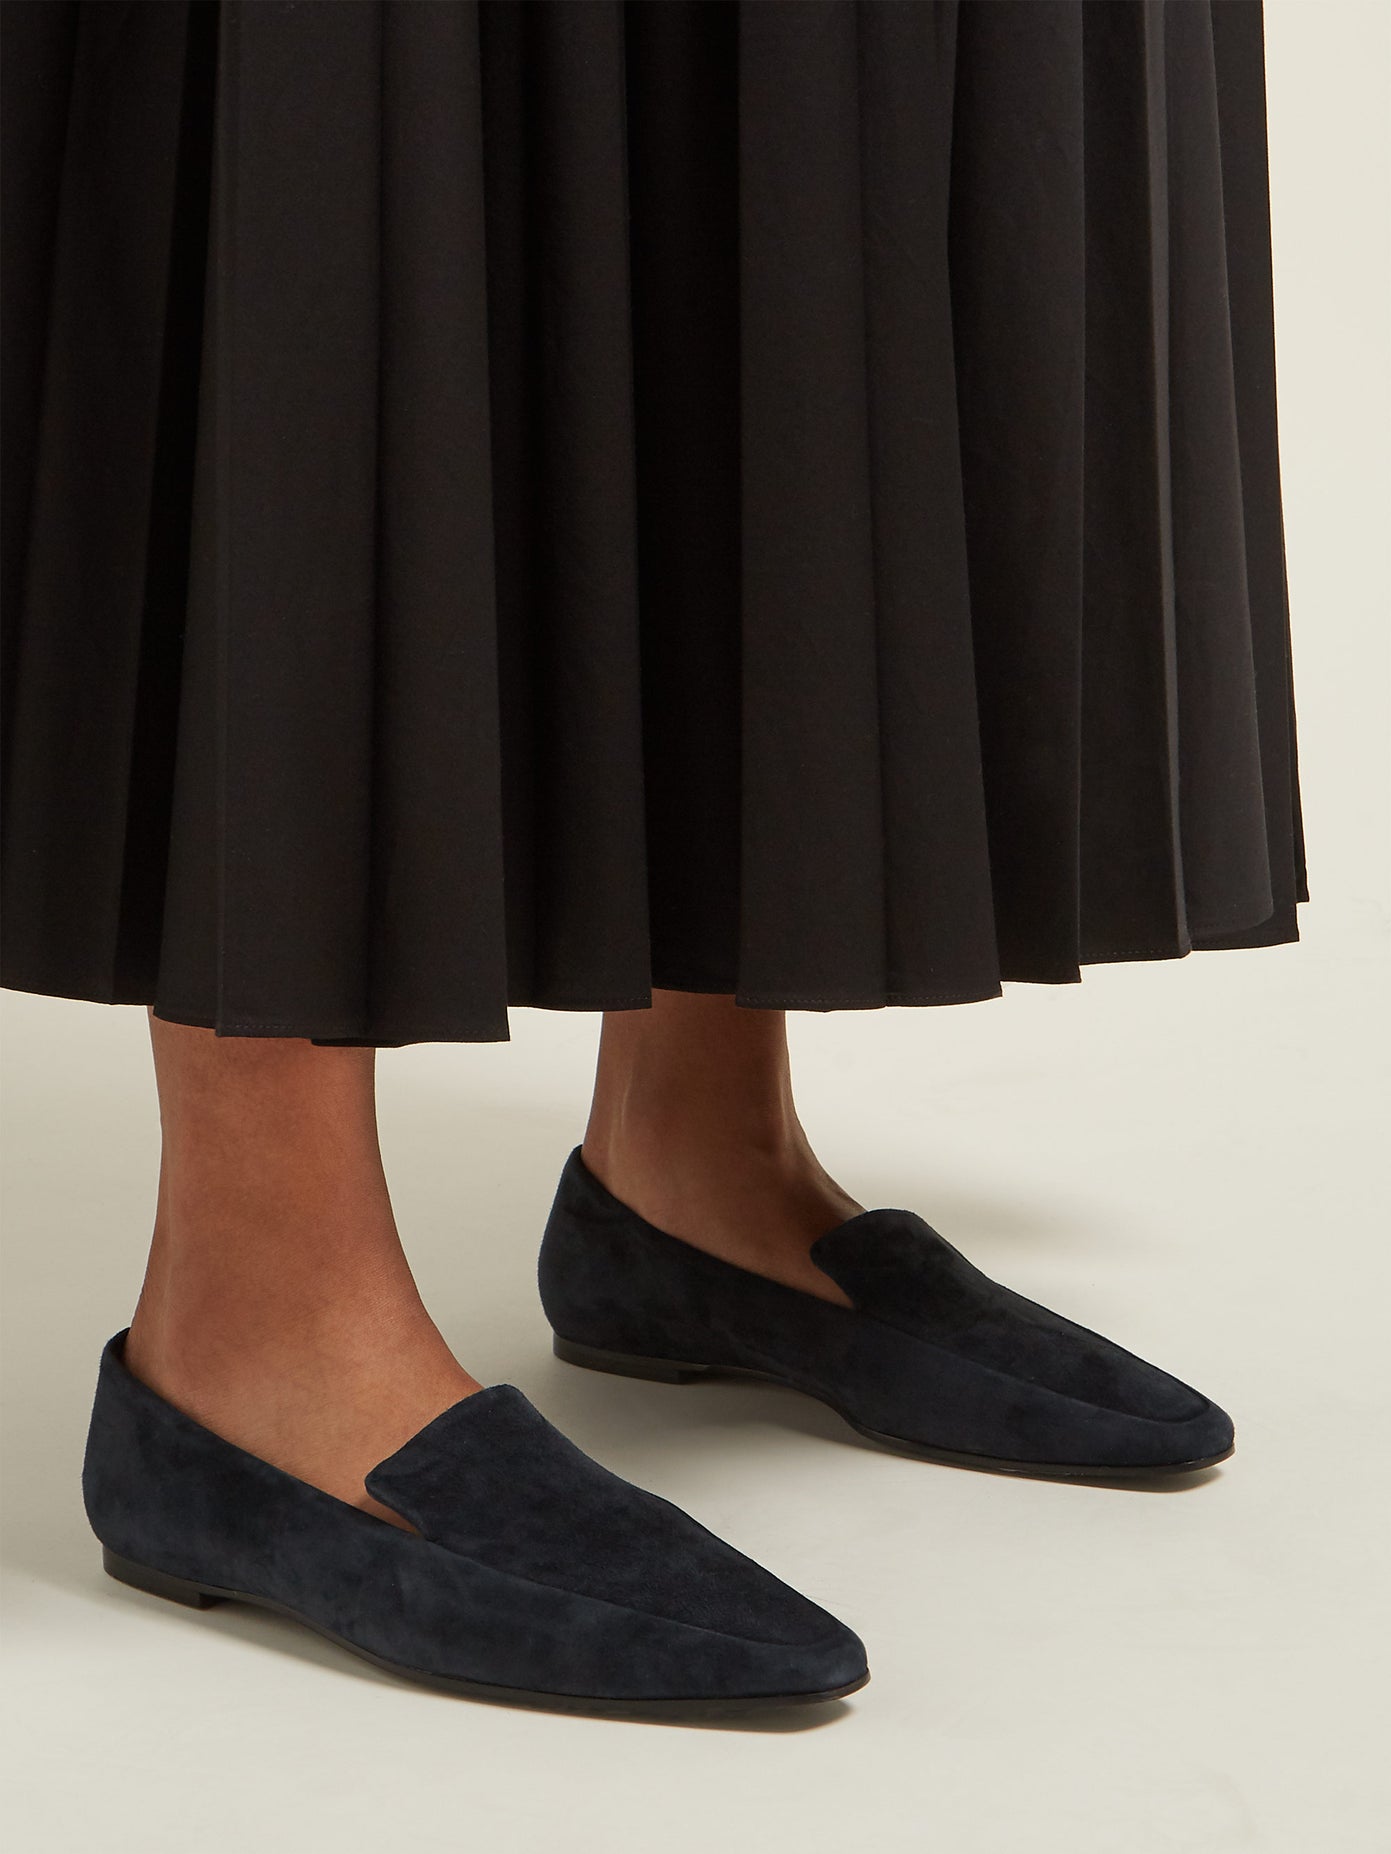 Designer Shoe Dupe - The Row suede loafers